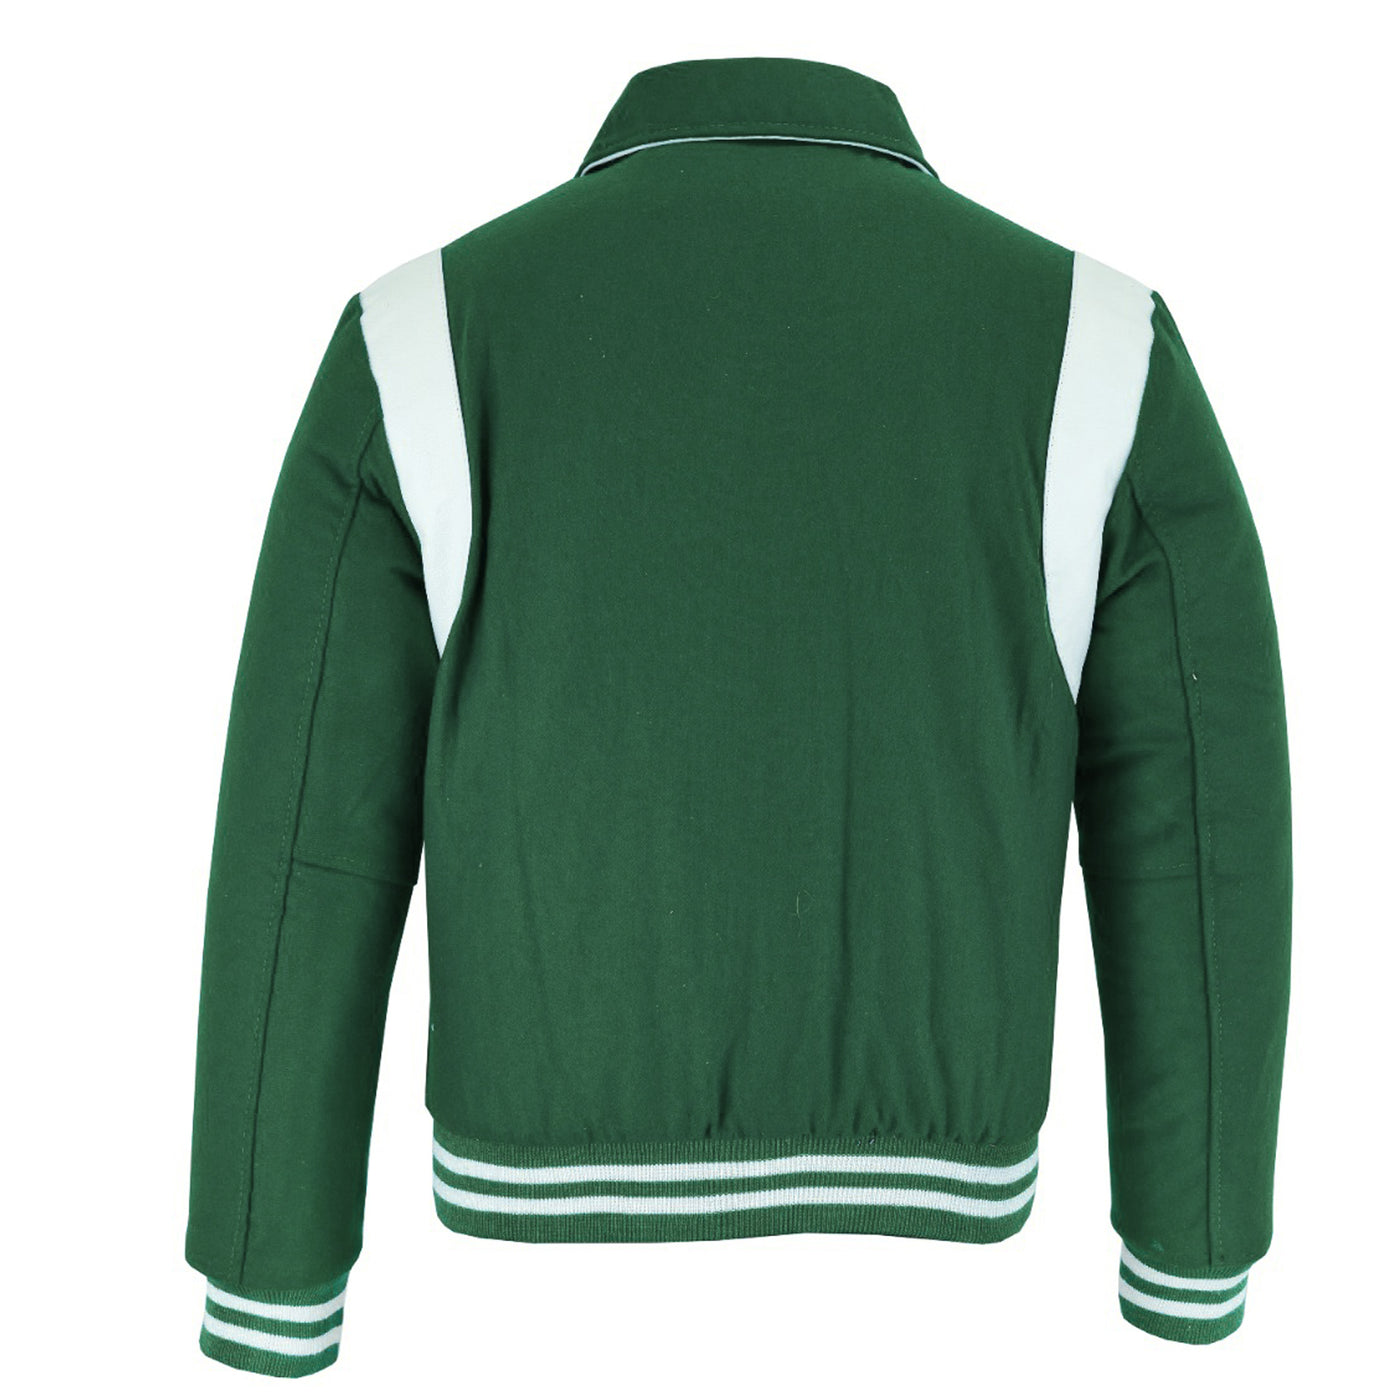 Classic Varsity Letterman Baseball College Jacket Green Wool with White Single Leather Strip